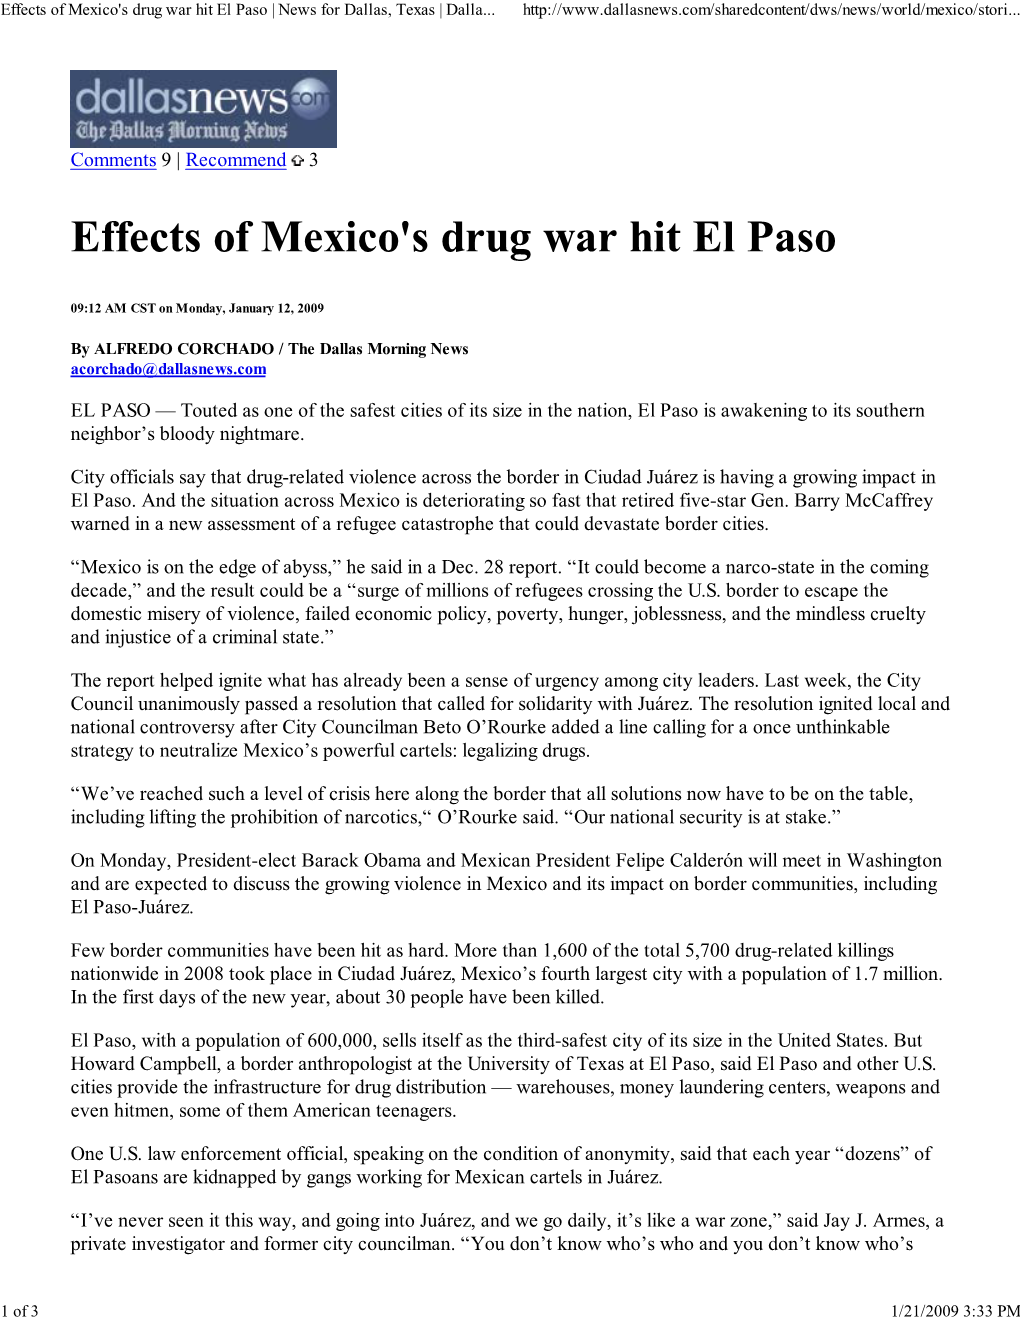 Effects of Mexico's Drug Wa